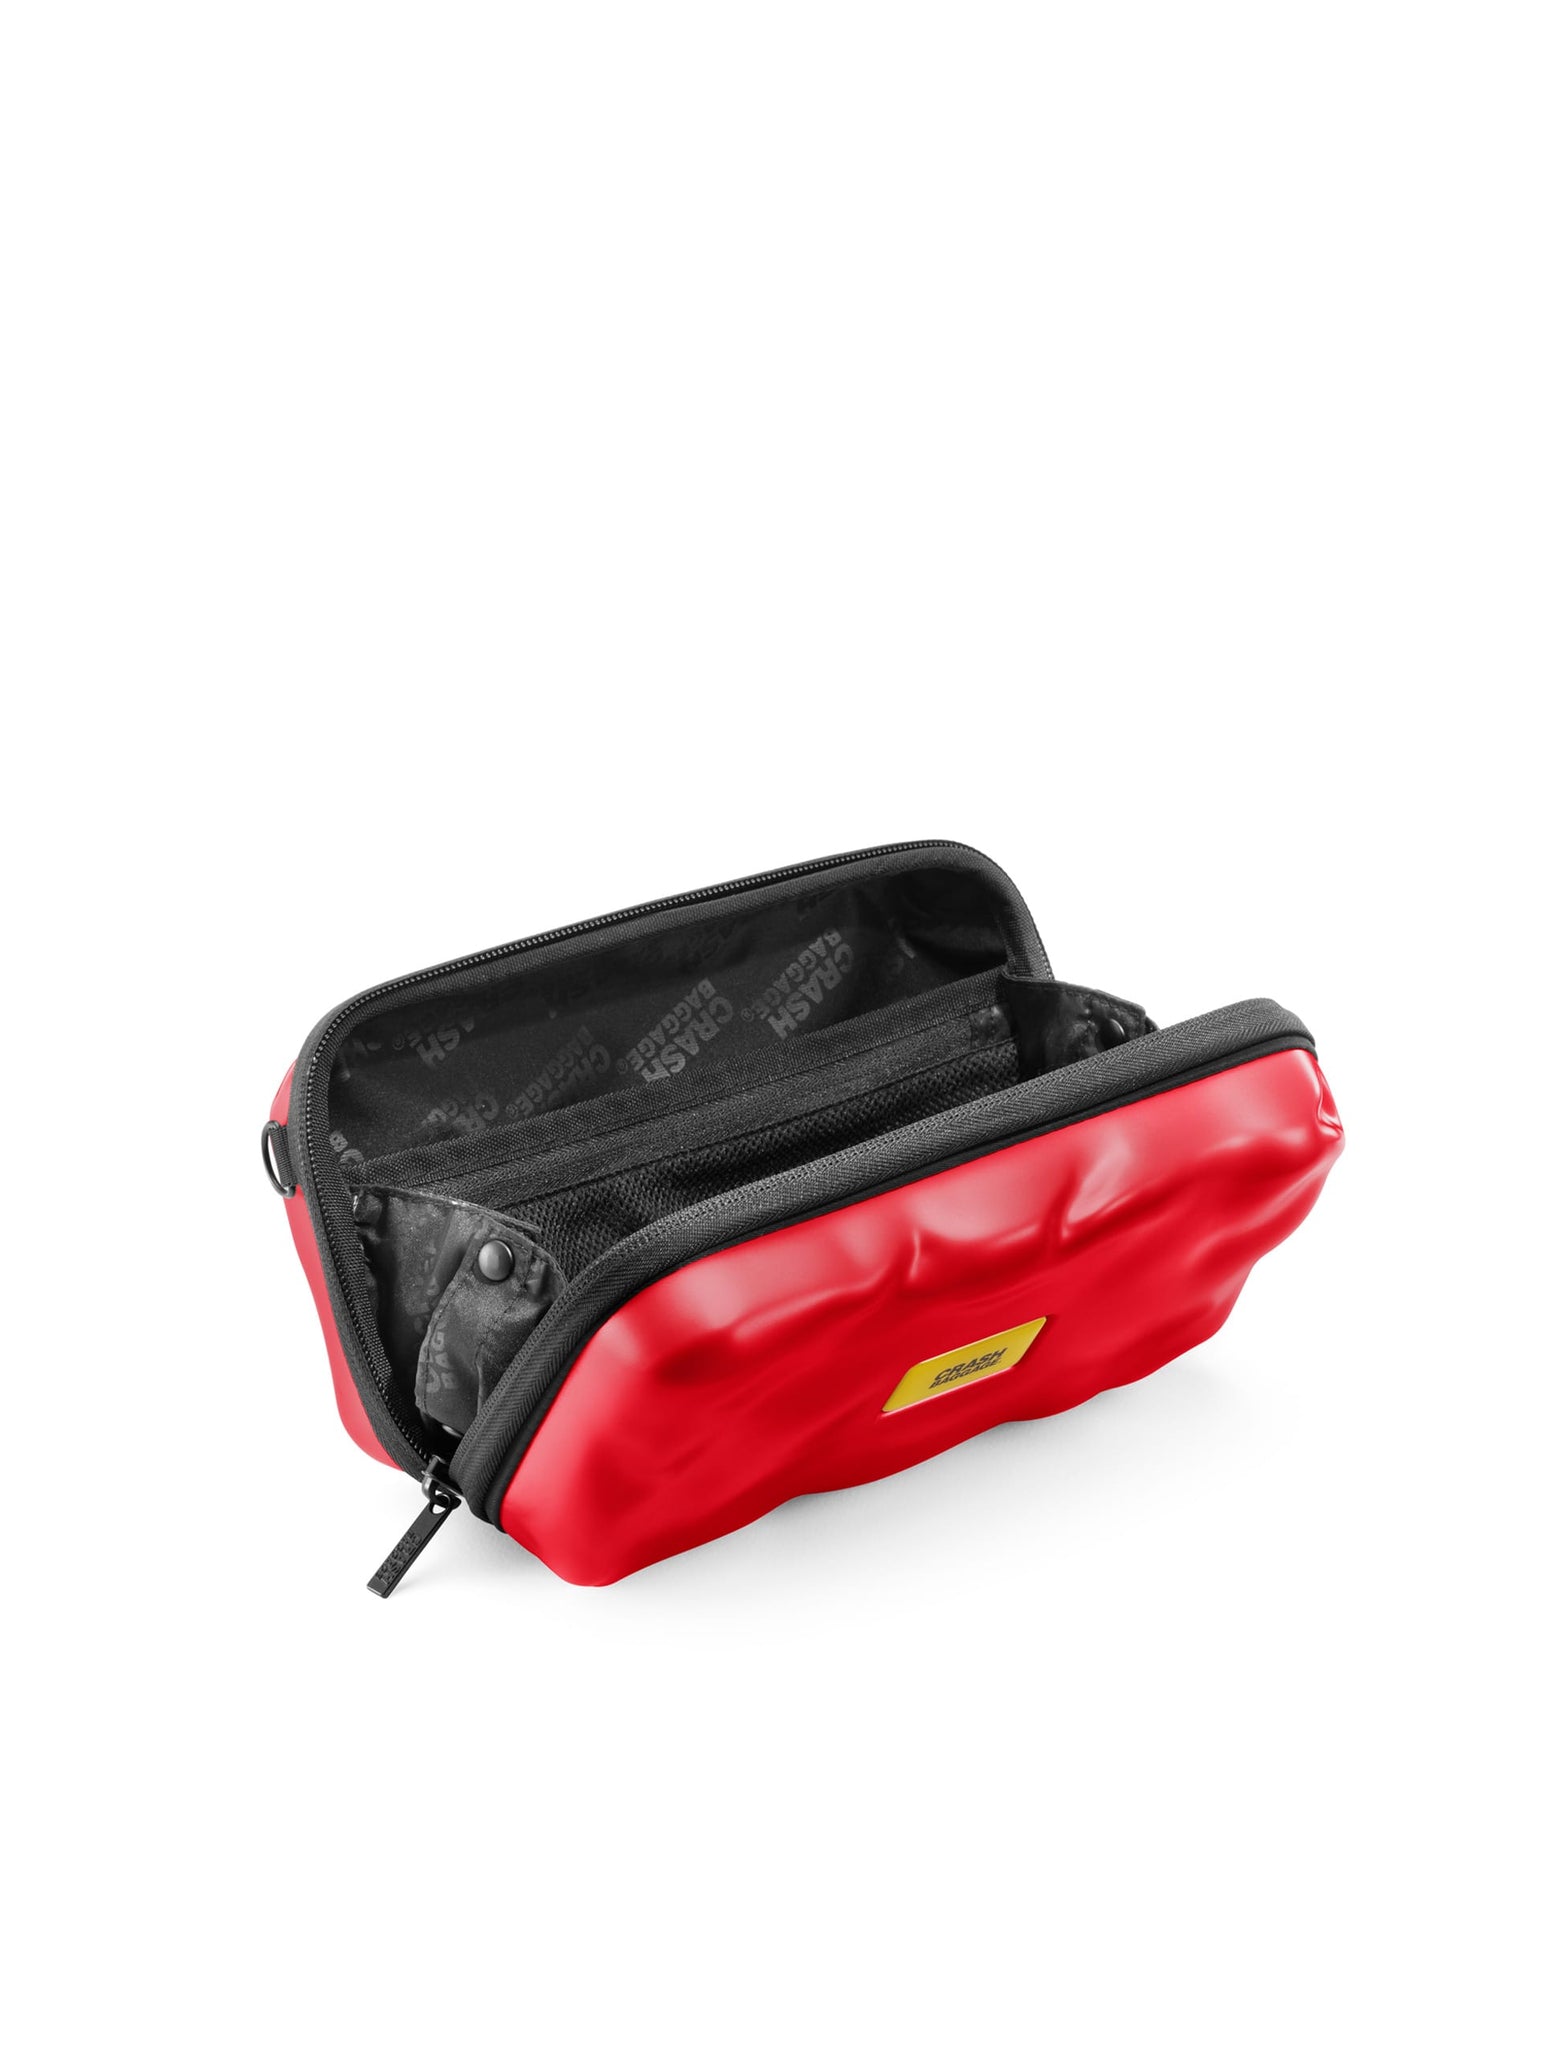 Crash Baggage Beauty Case Rosso